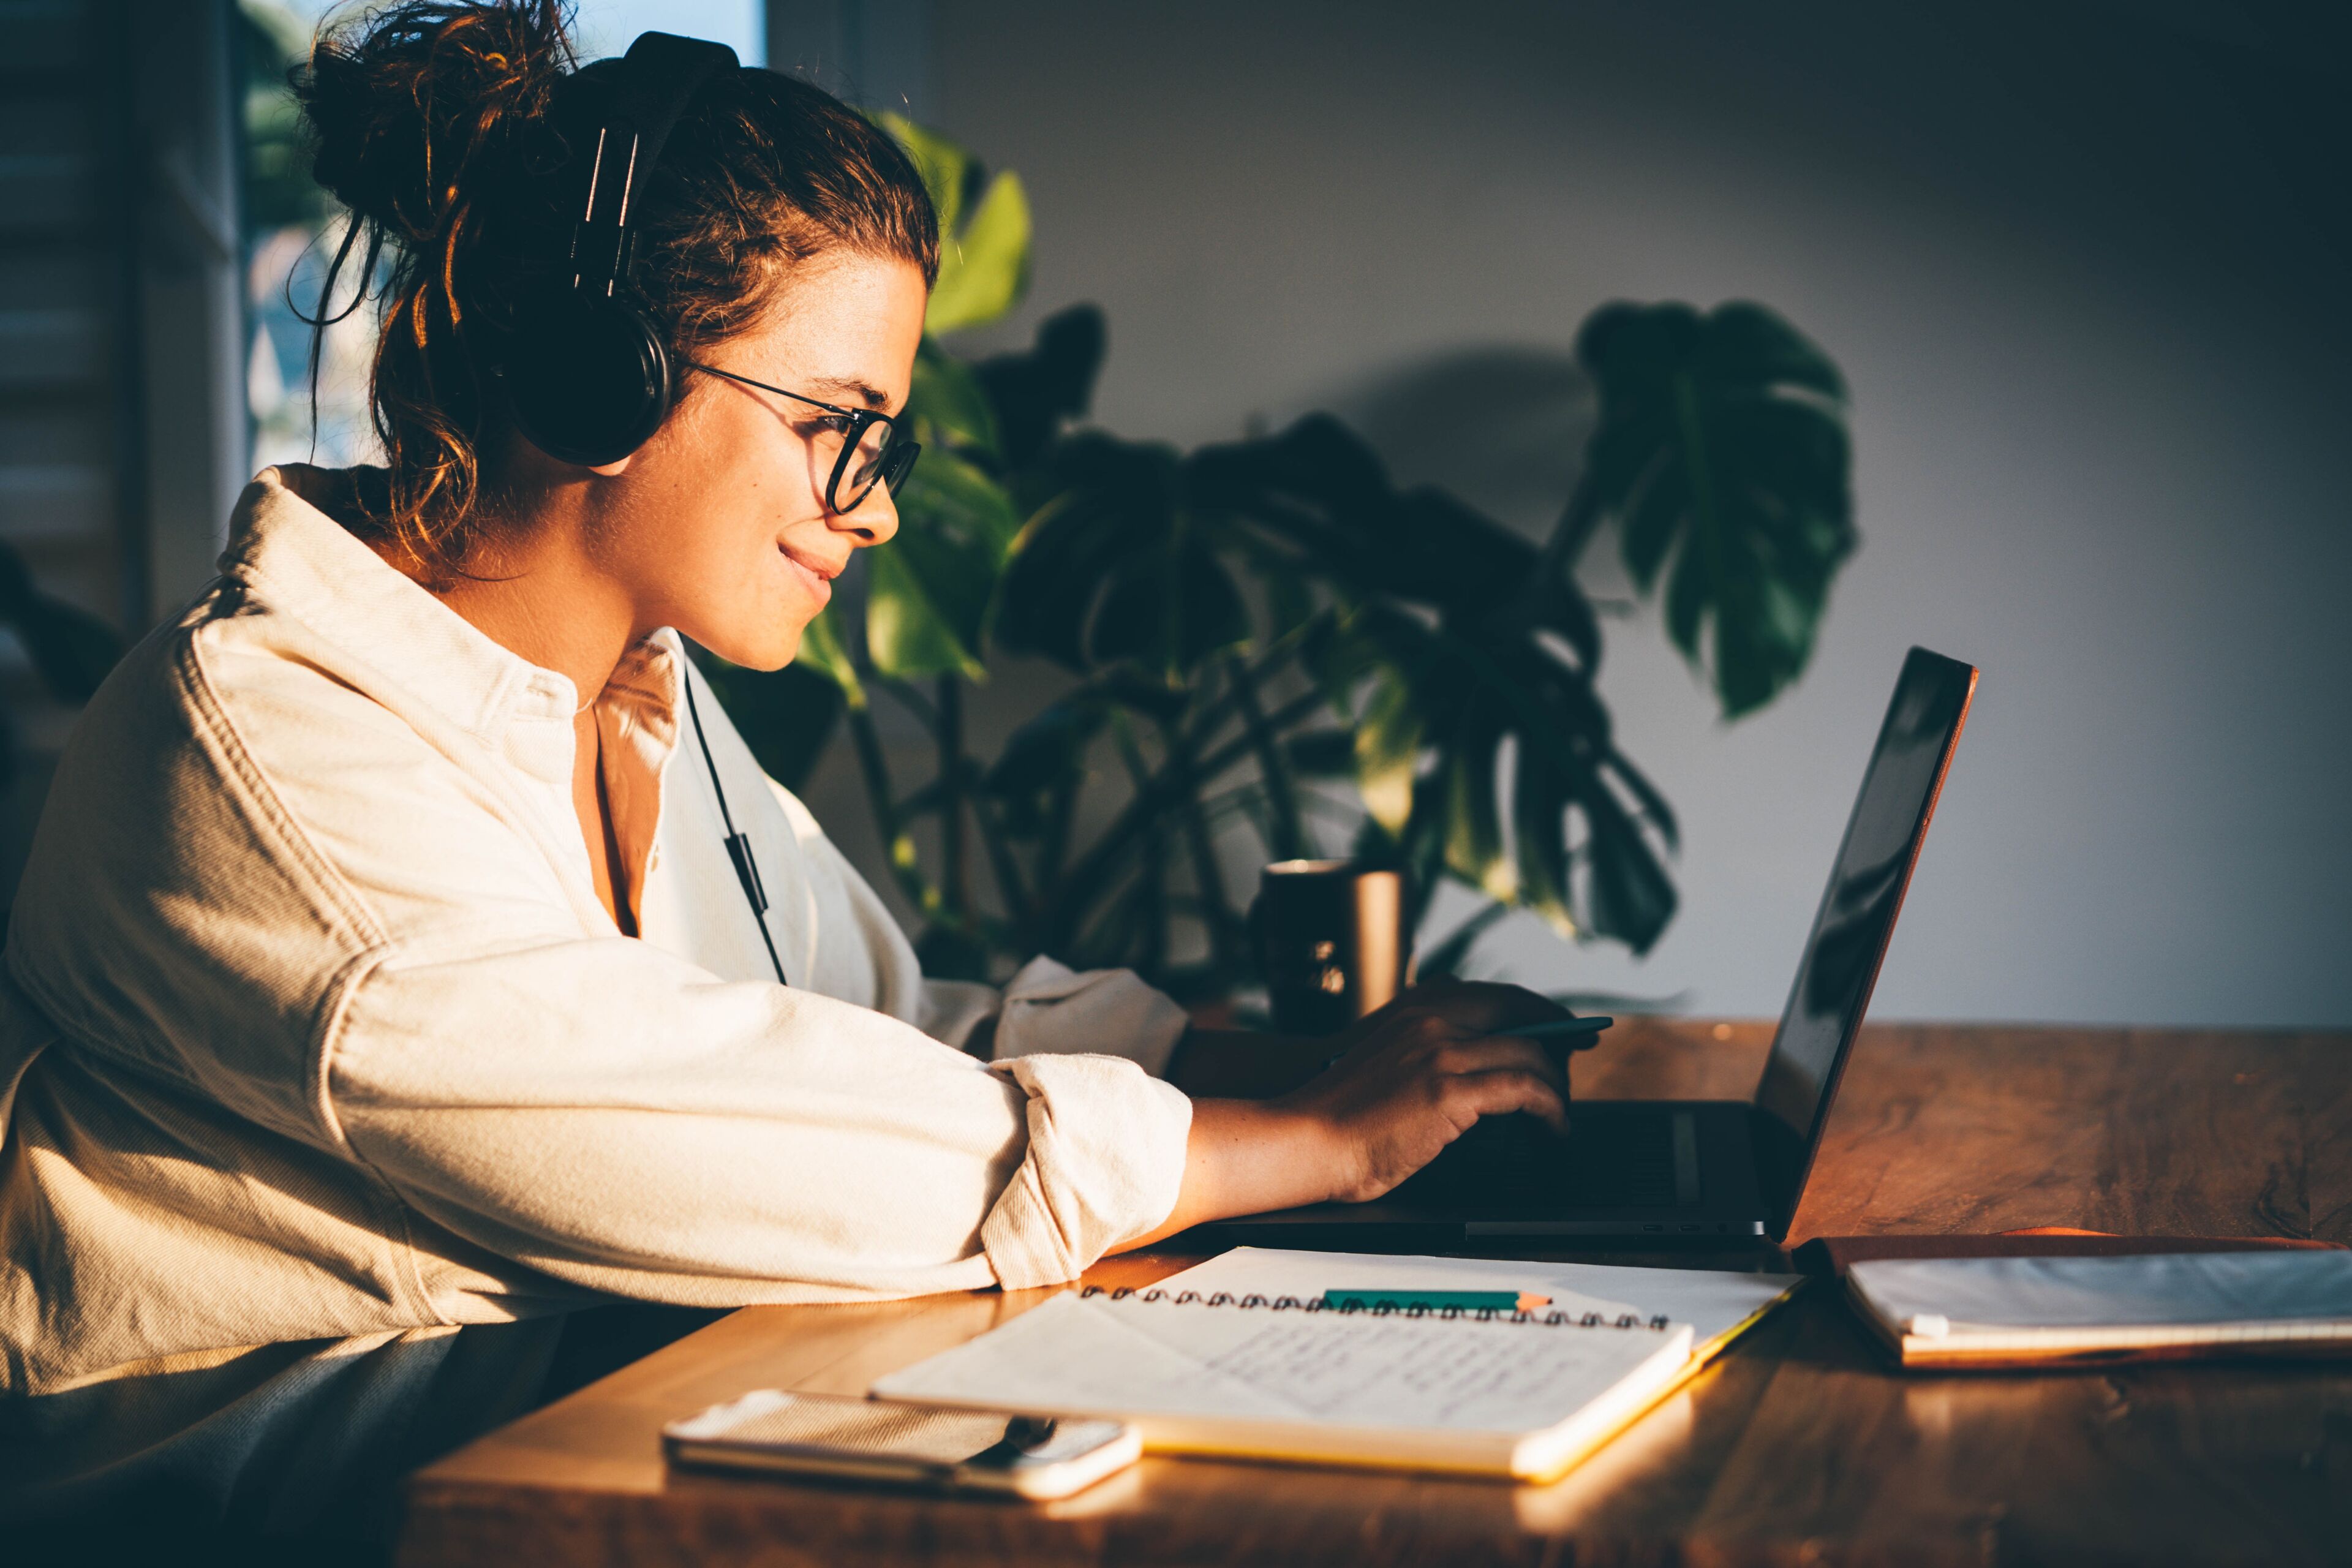 A focused woman in glasses using a laptop at a wooden desk with headphones on, notebook at hand, and a houseplant beside her, bathed in the warm glow of the sunset.